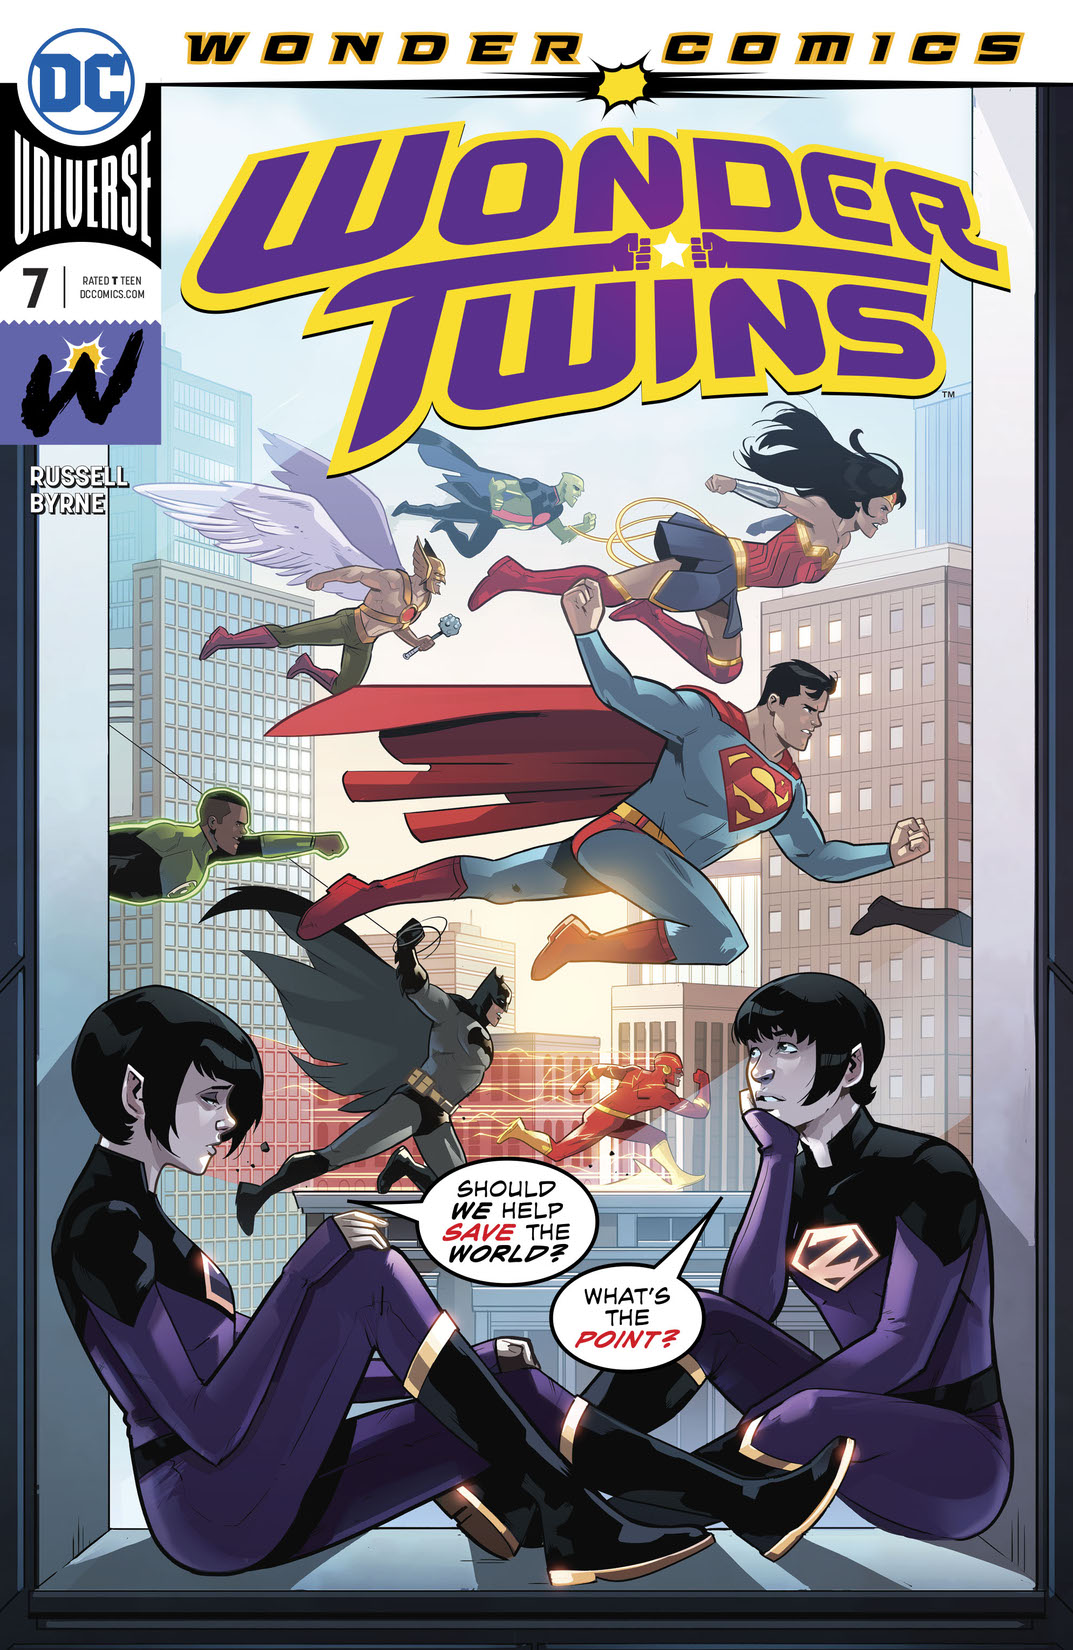 Wonder Twins #7 preview images